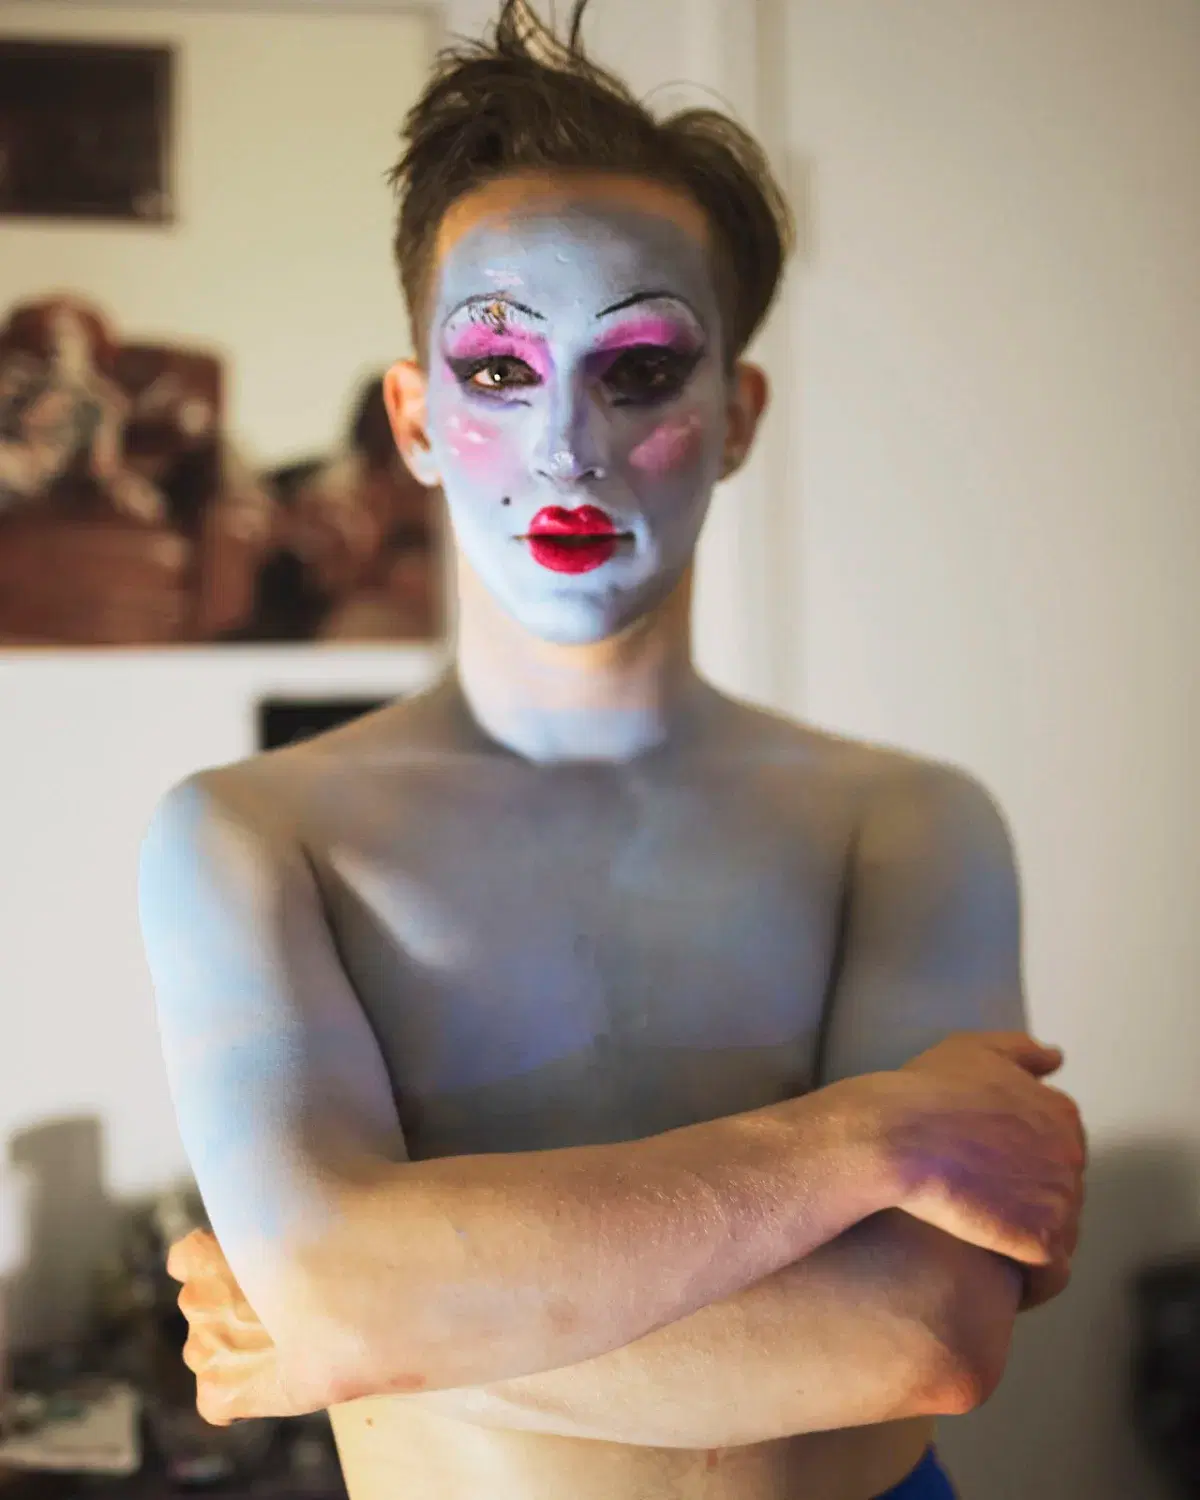 a man with his arms crosse wearing performance makeup